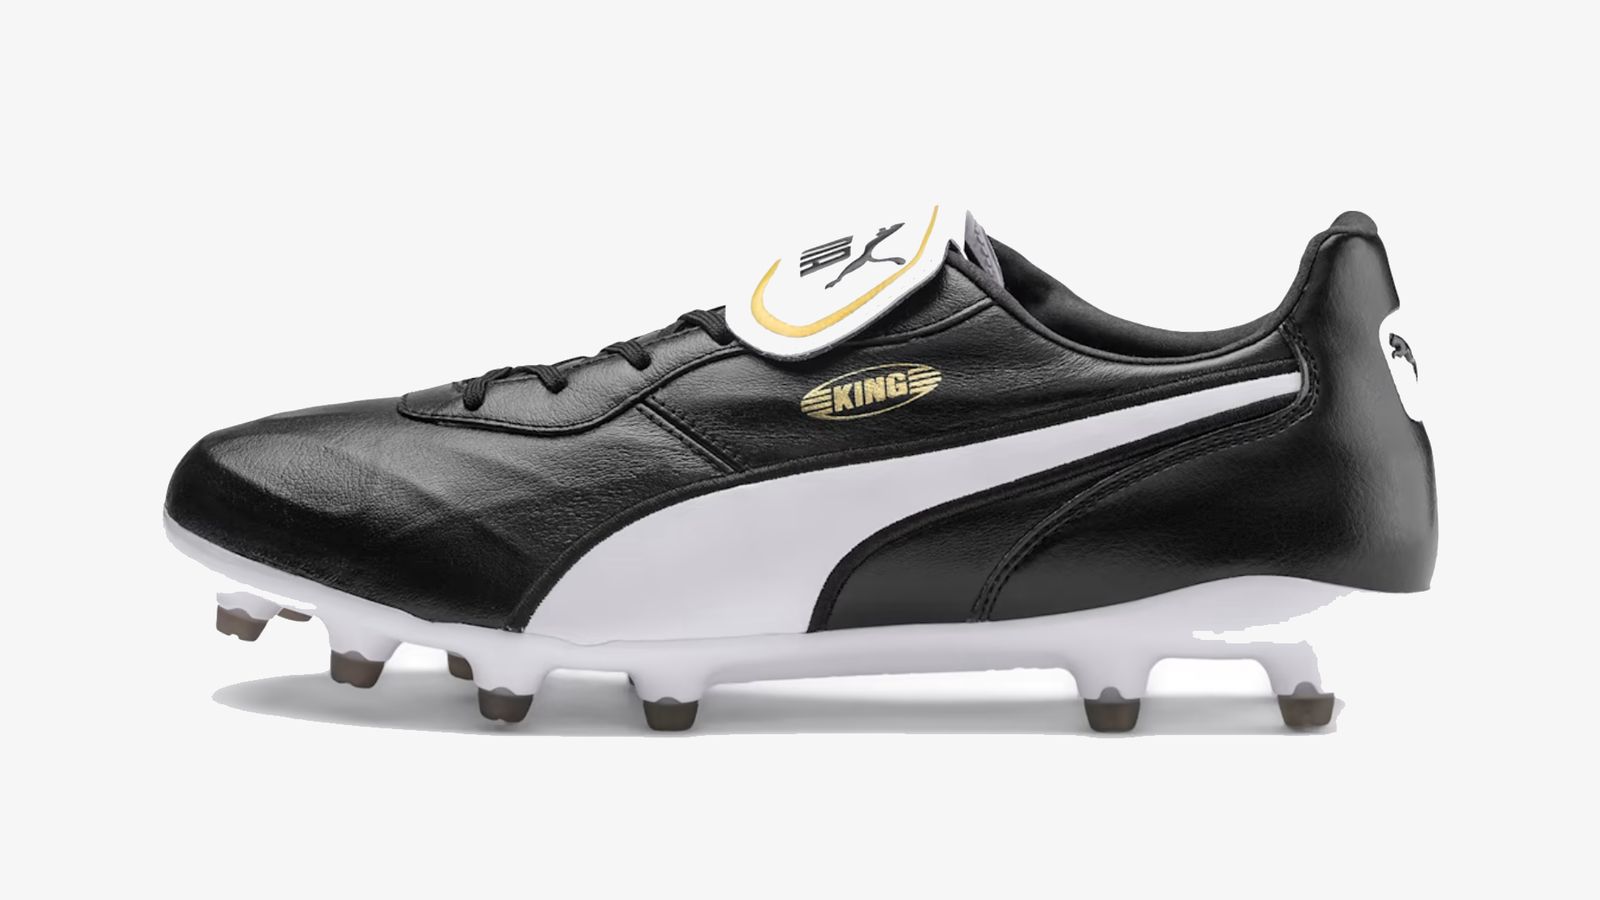 PUMA King Top product image of a black and white PUMA boot featuring gold branding.